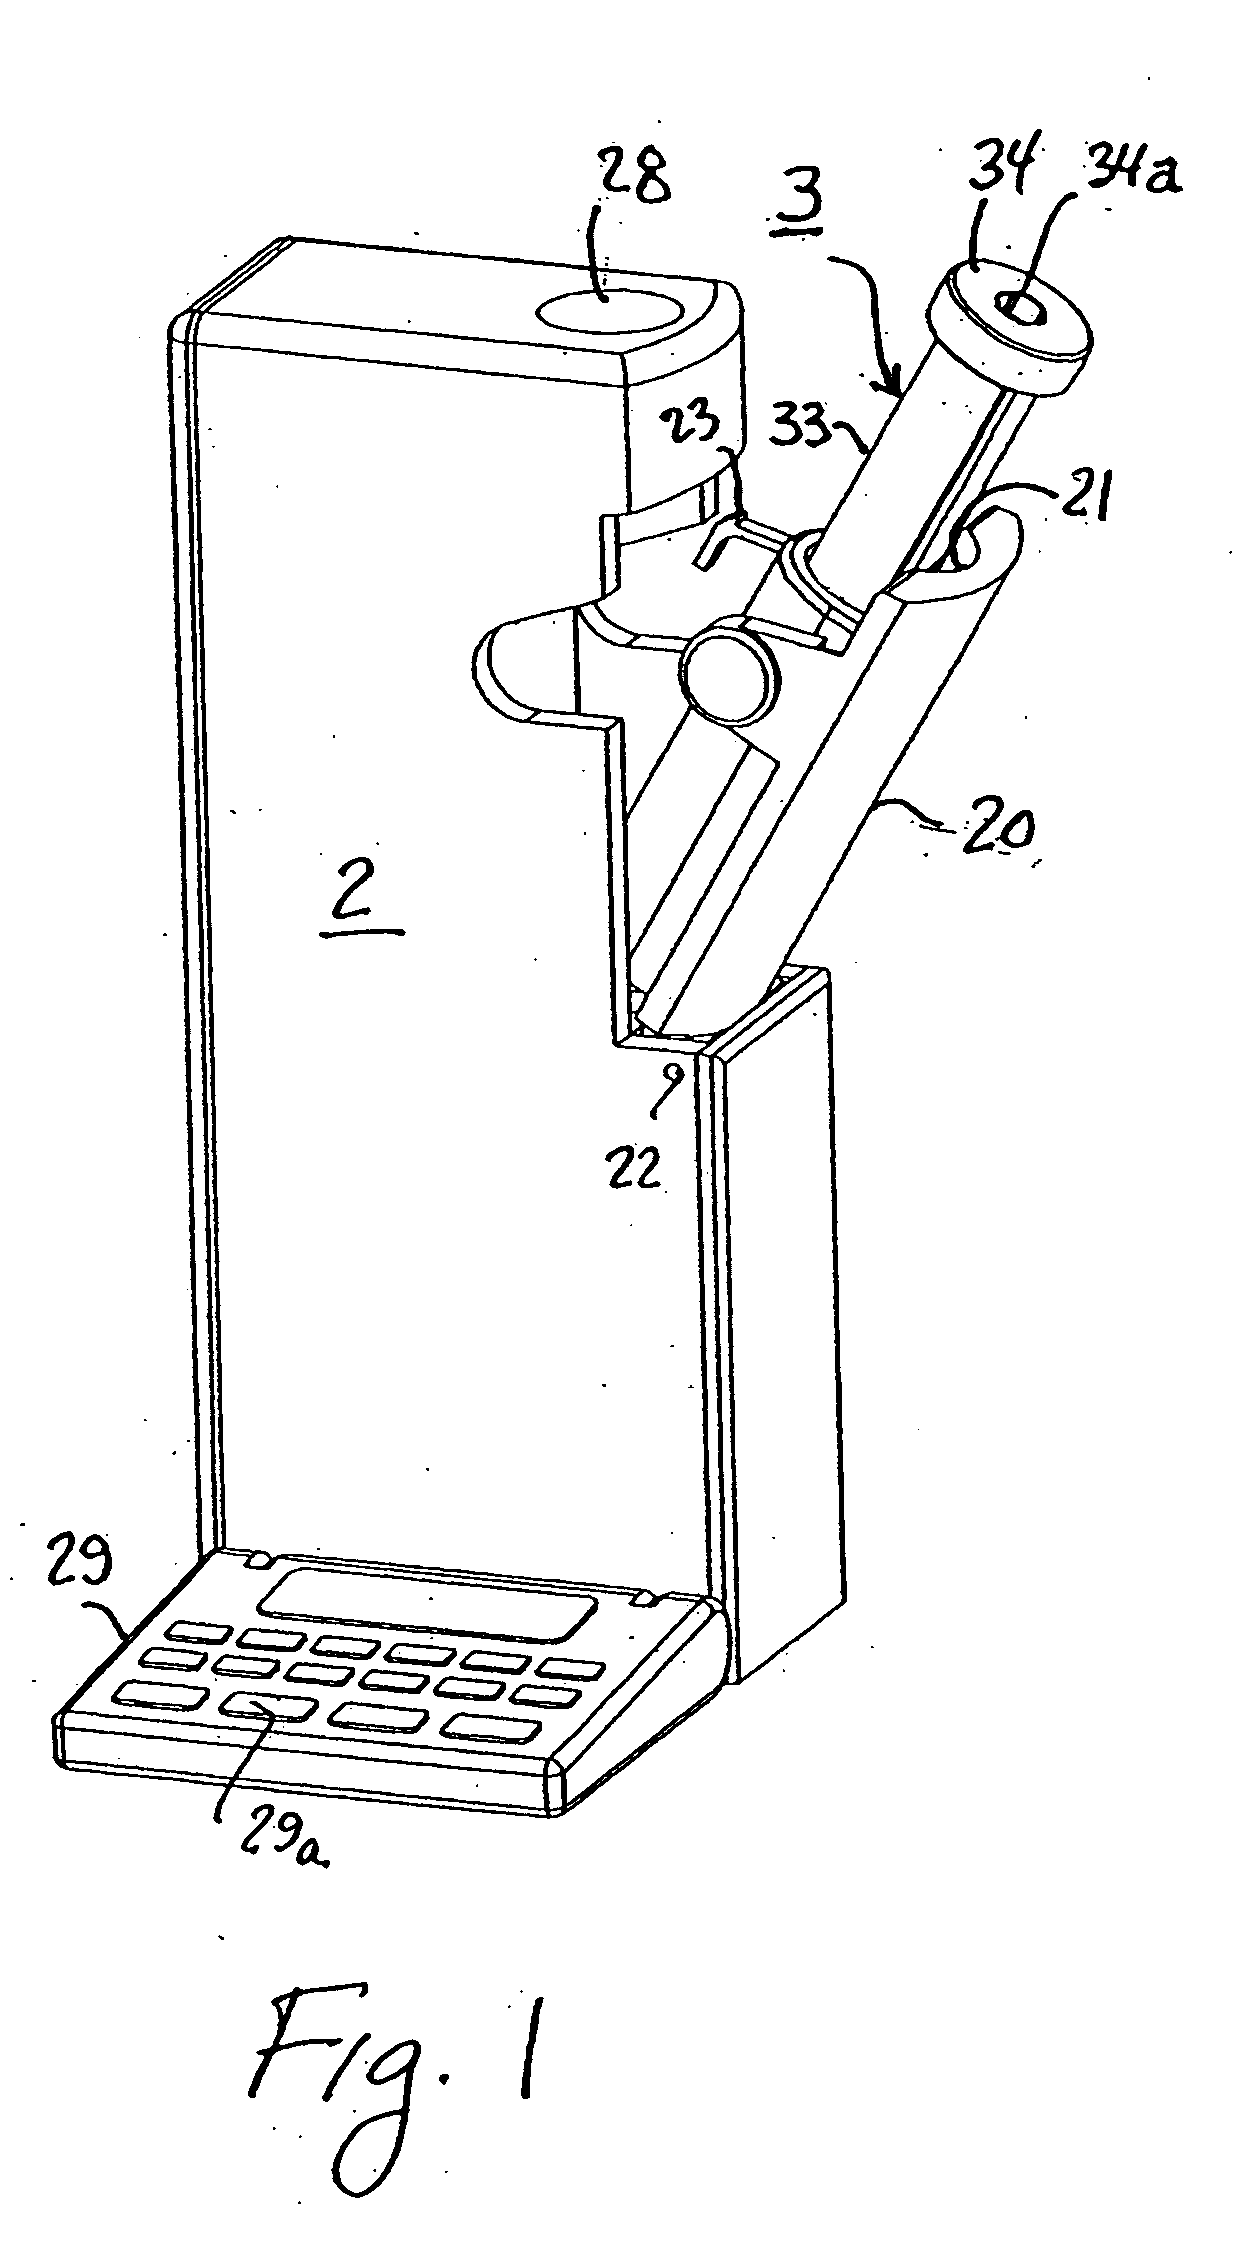 Dosage device and method particularly useful for preparing liquid medications